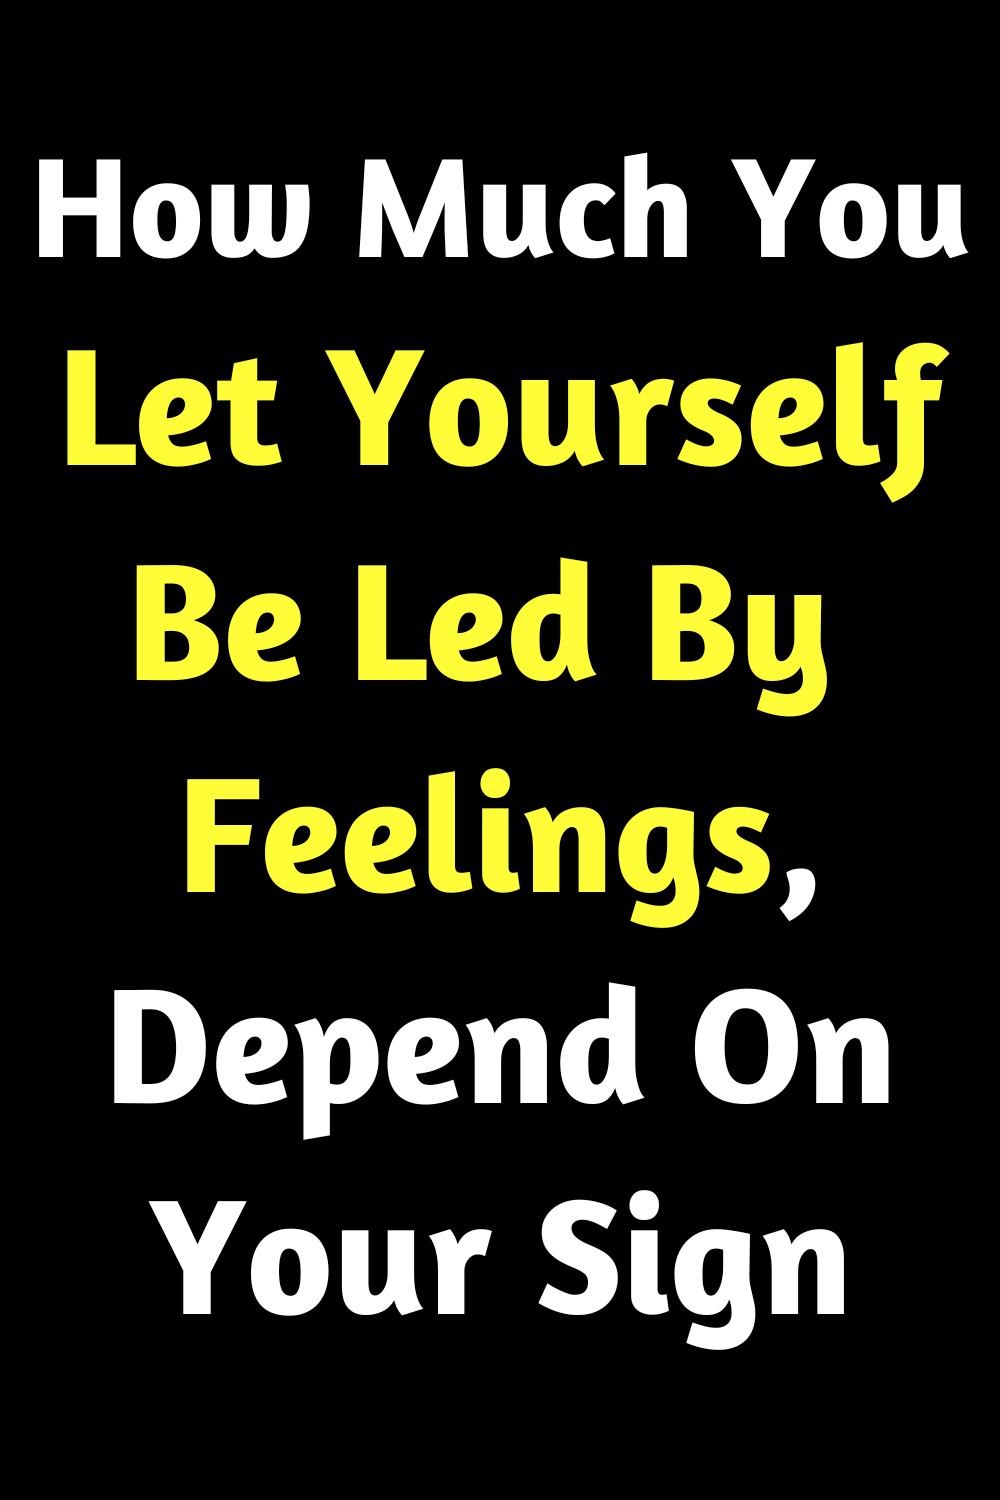 How Much You Let Yourself Be Led By Feelings, Depend On Your Sign